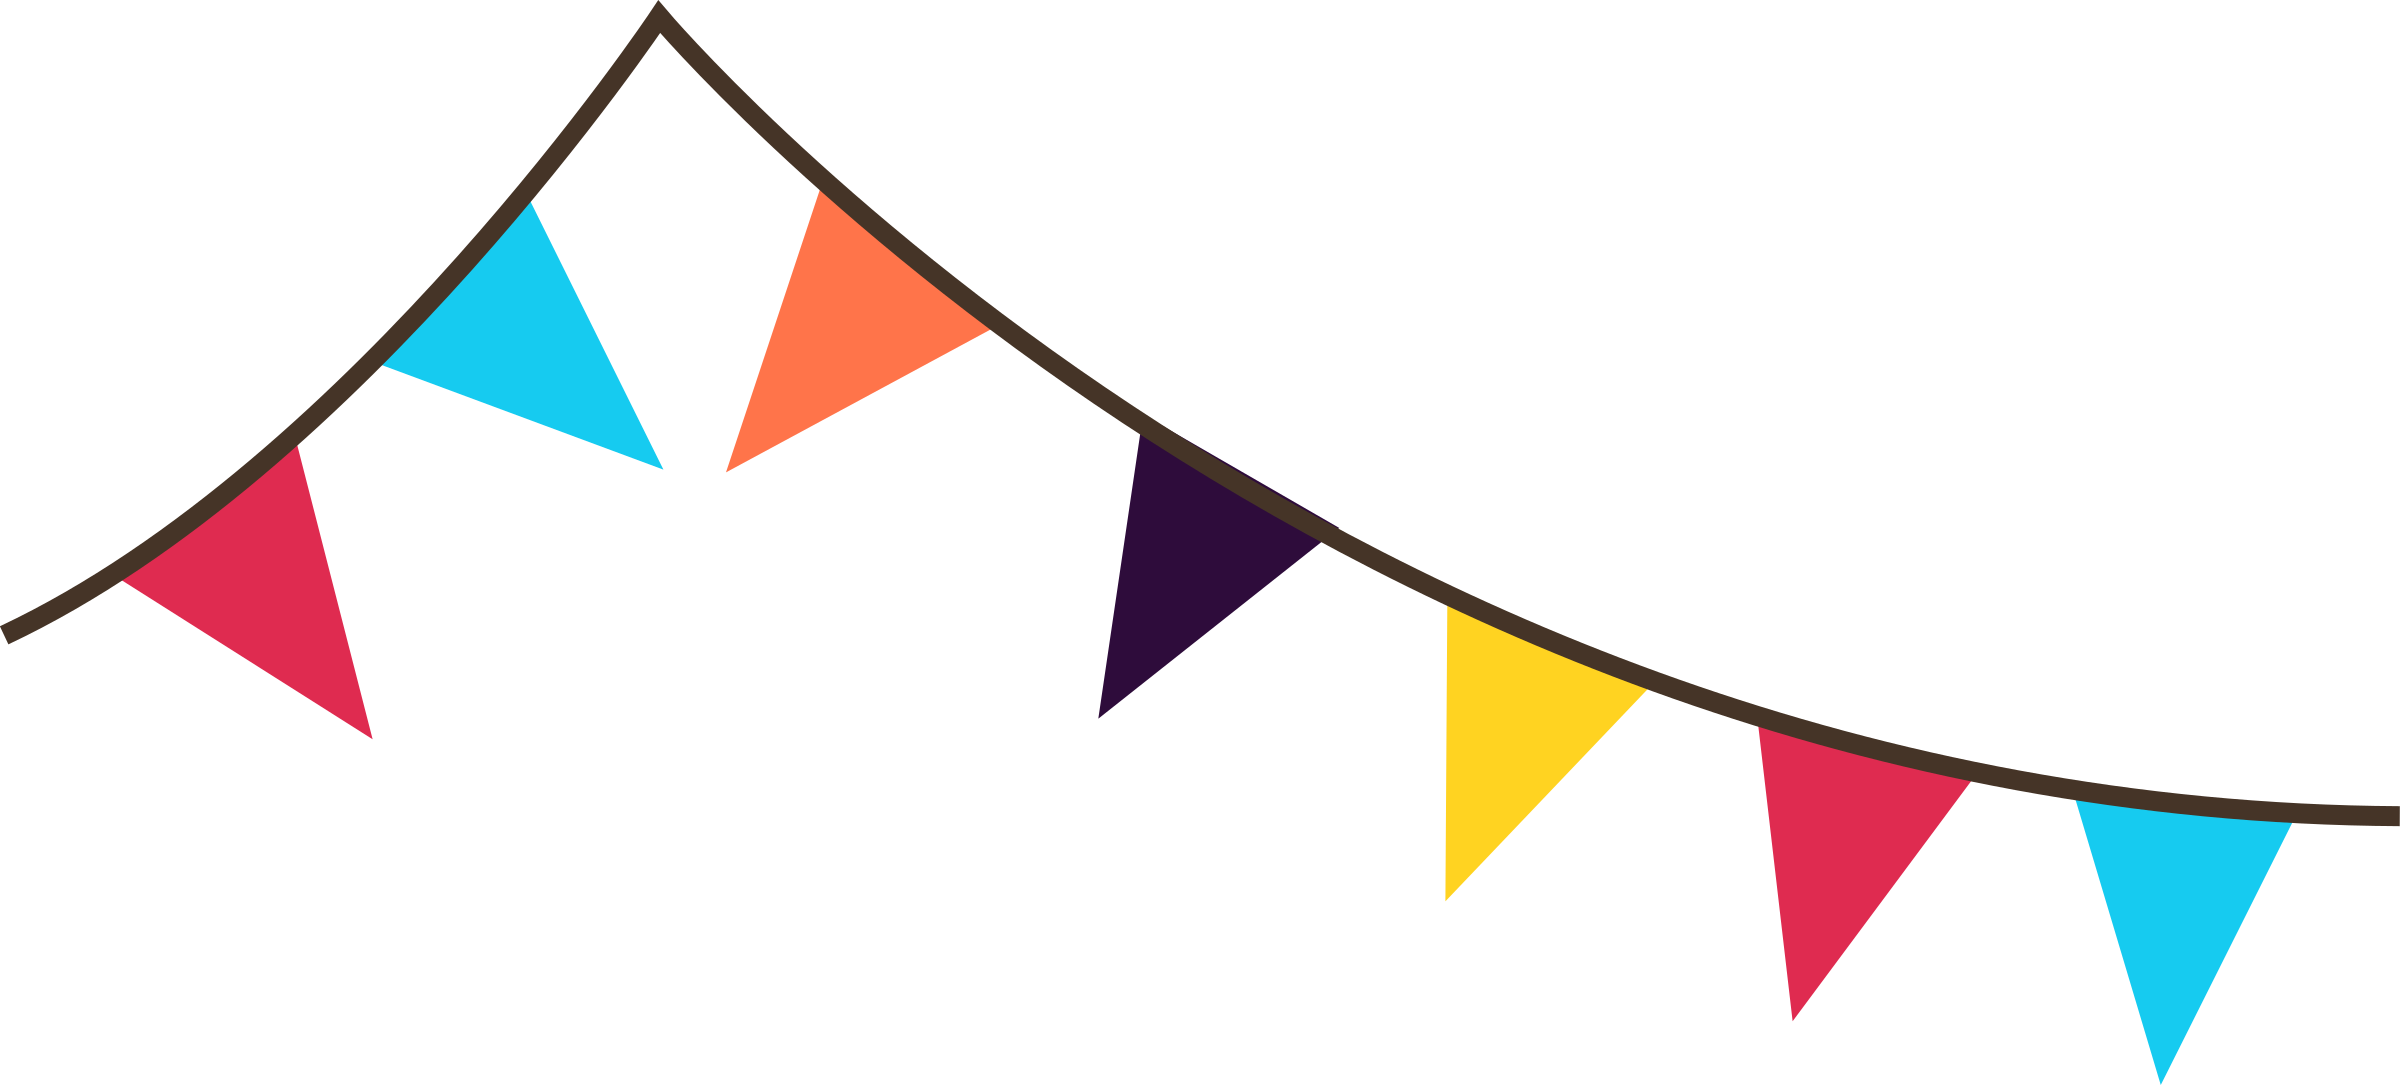 Bunting Banner Flags By .